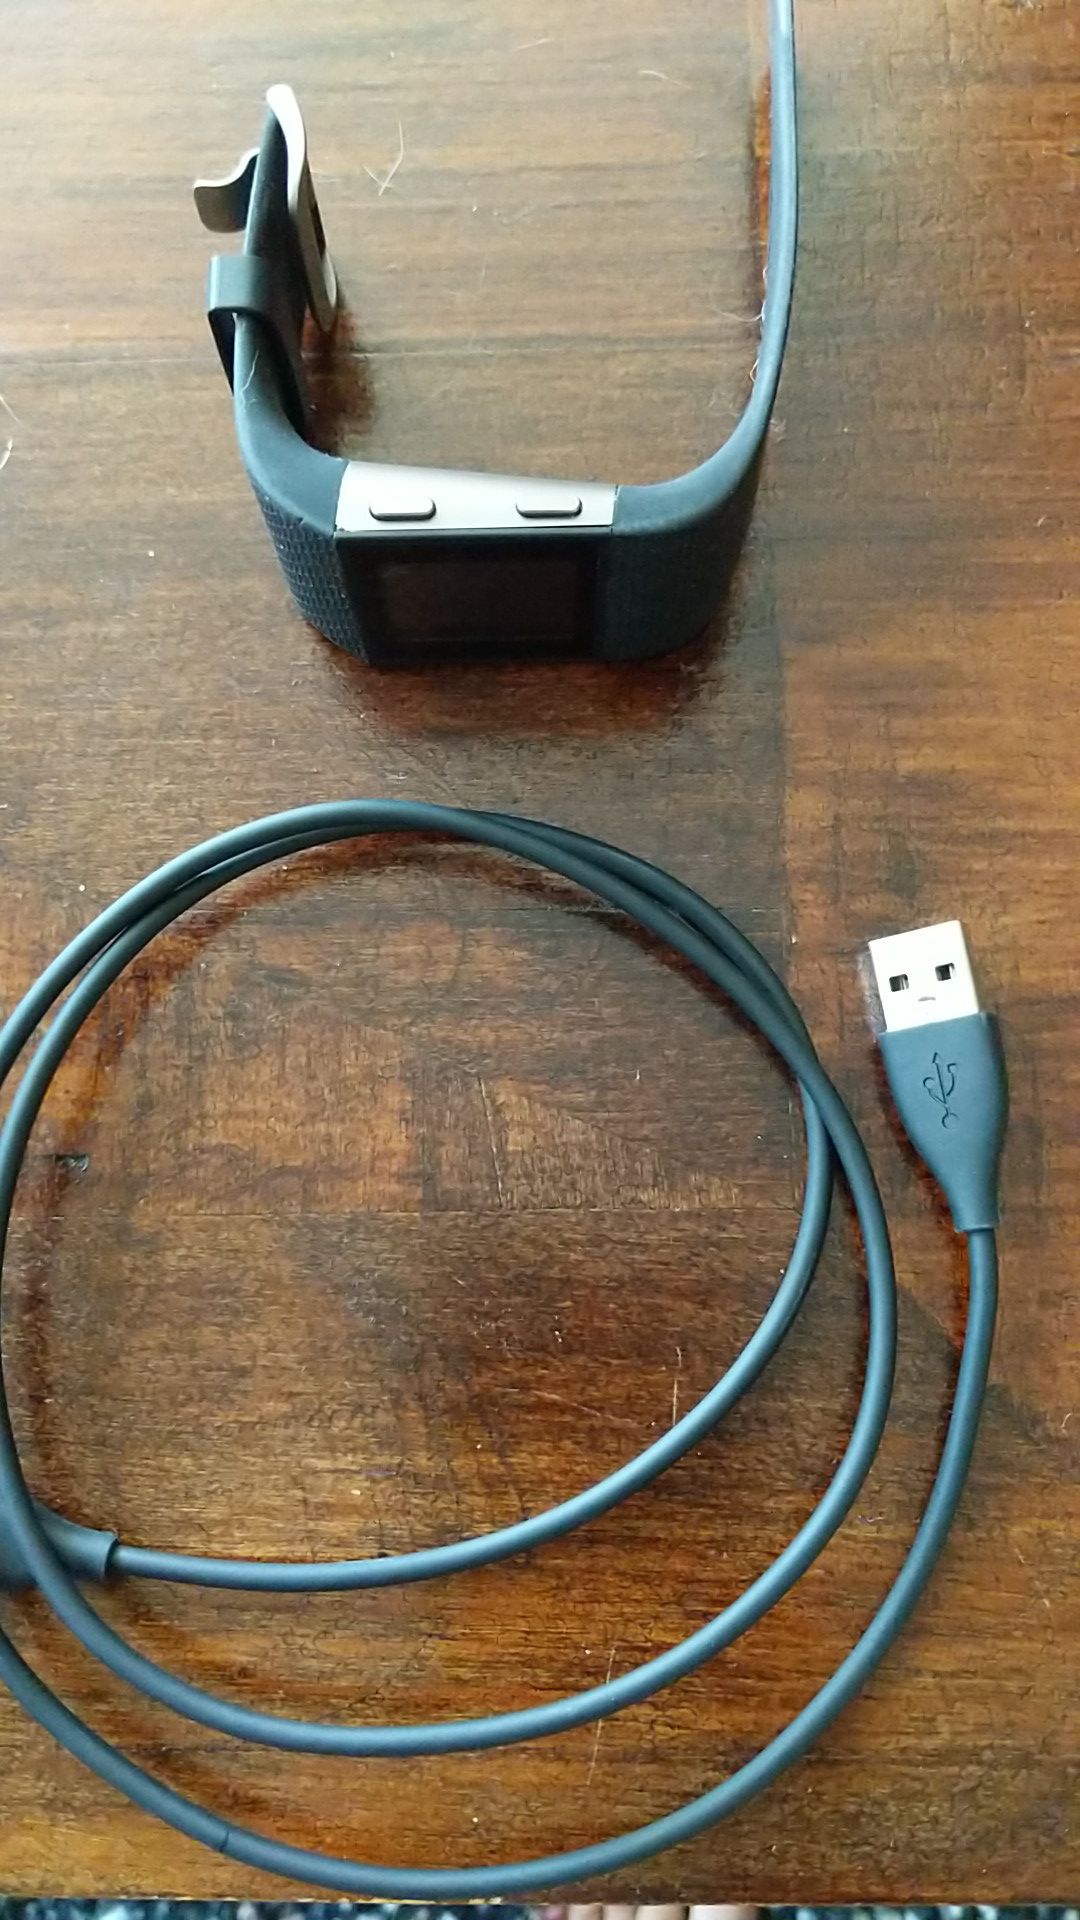 Fitbit Surge w/ charger